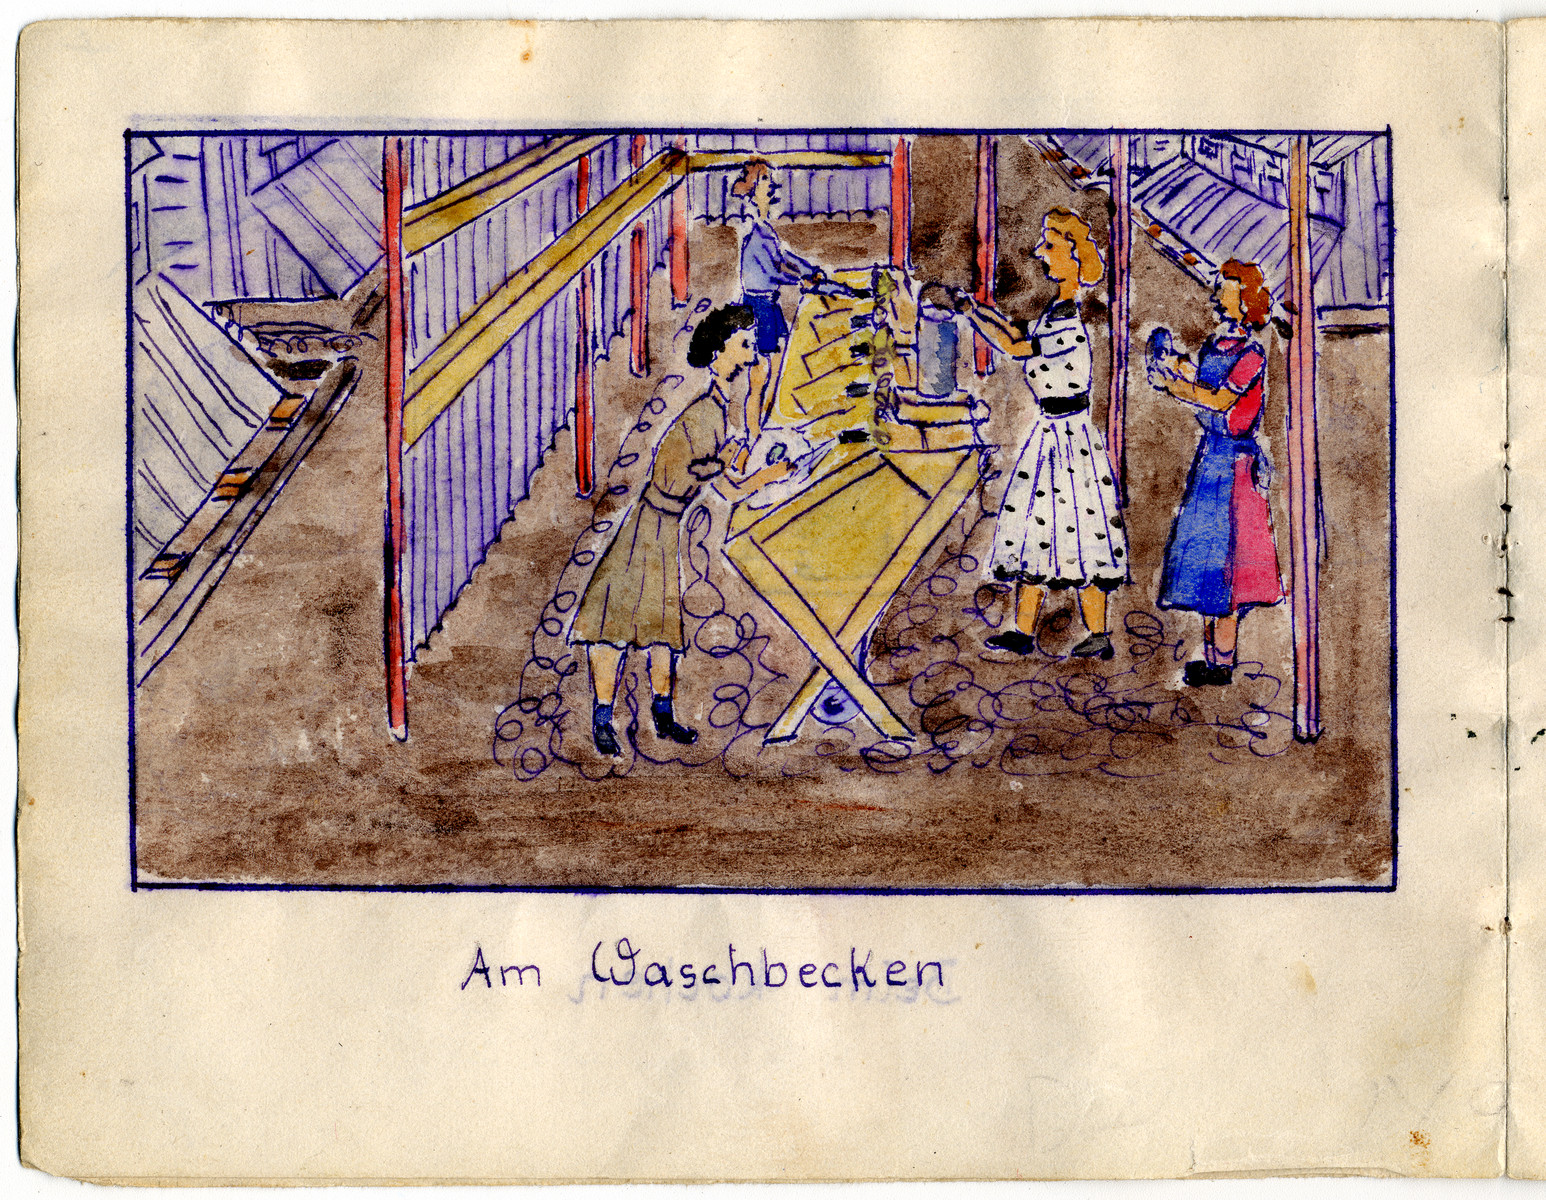 Page from the memoirs of Camp de Gurs illustrated by Eva Liebhold.

This page is entitled "The sink" shows four women standing by a row of basins doing dishes.